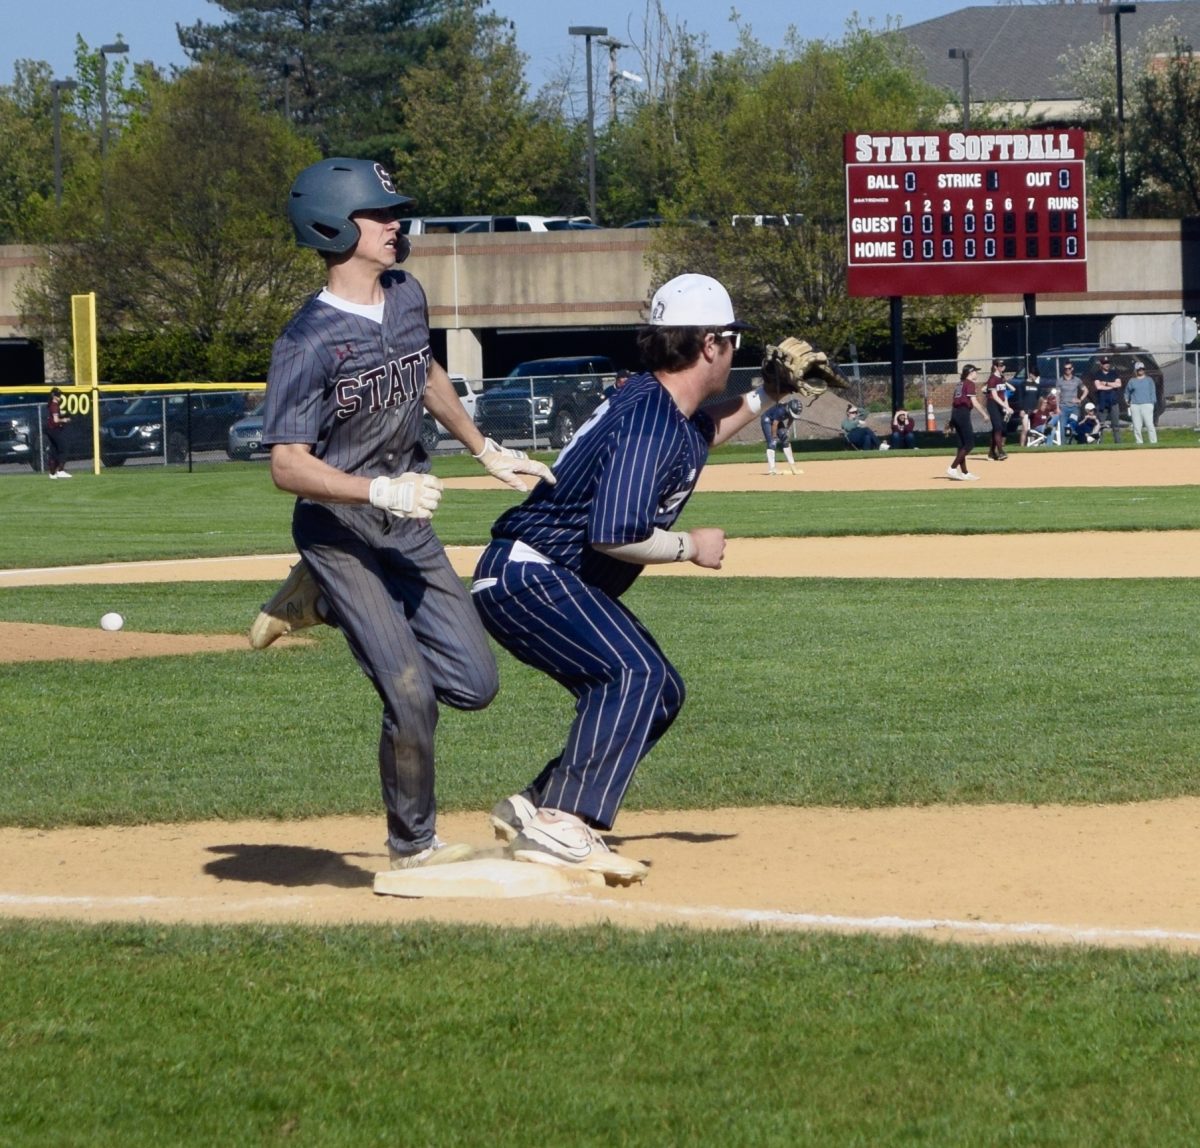 Sophomore Michael Powell reaches first on a bunt in the second inning.